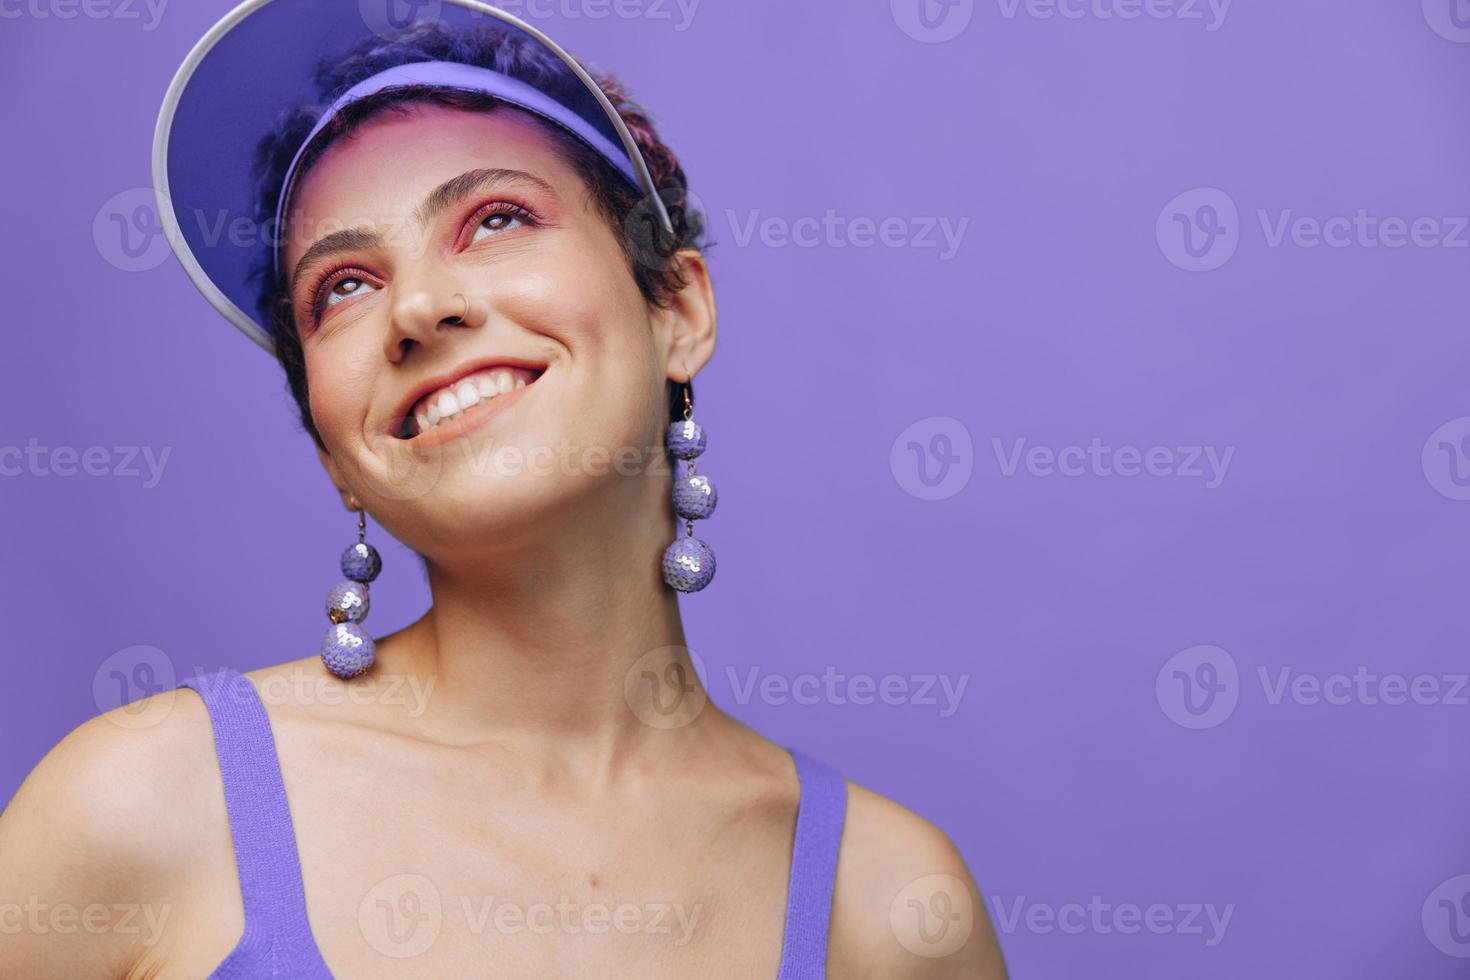 Portrait of a sporty fashion woman posing smiling in a purple sports suit for yoga and a transparent cap on a purple background monochrome photo